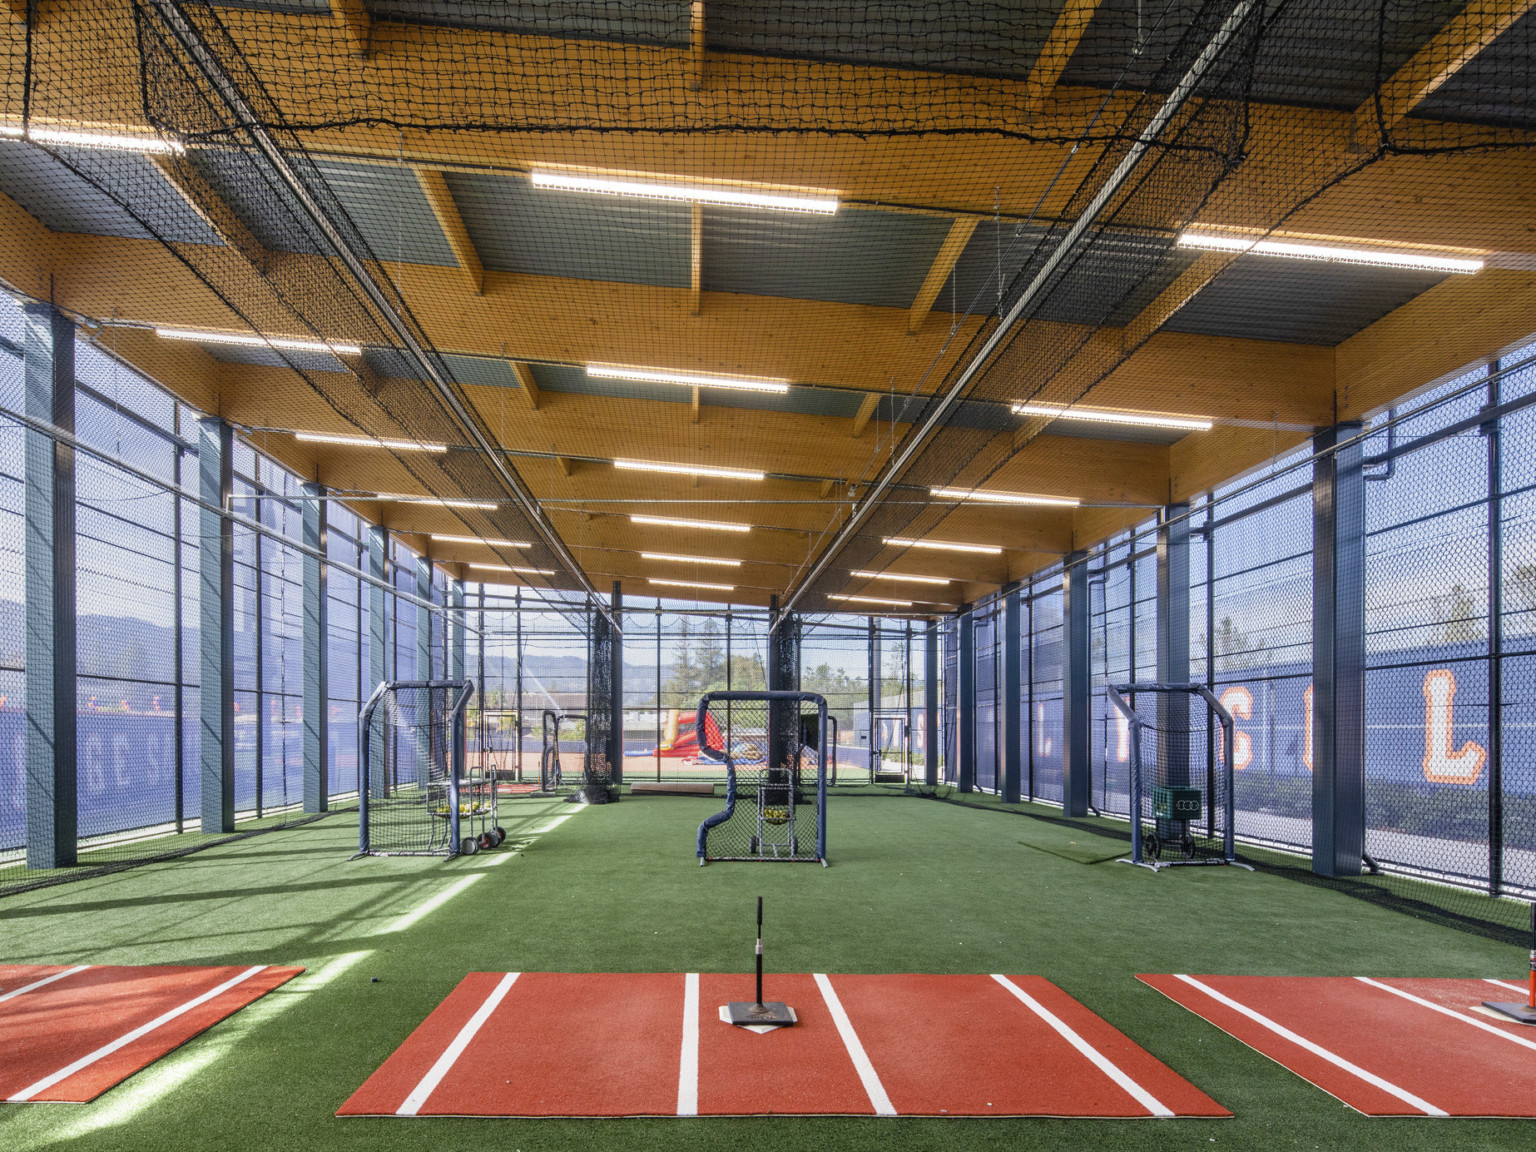 Training space with exposed wood beams overhead. Turf ground with batting area and bins of balls behind netting